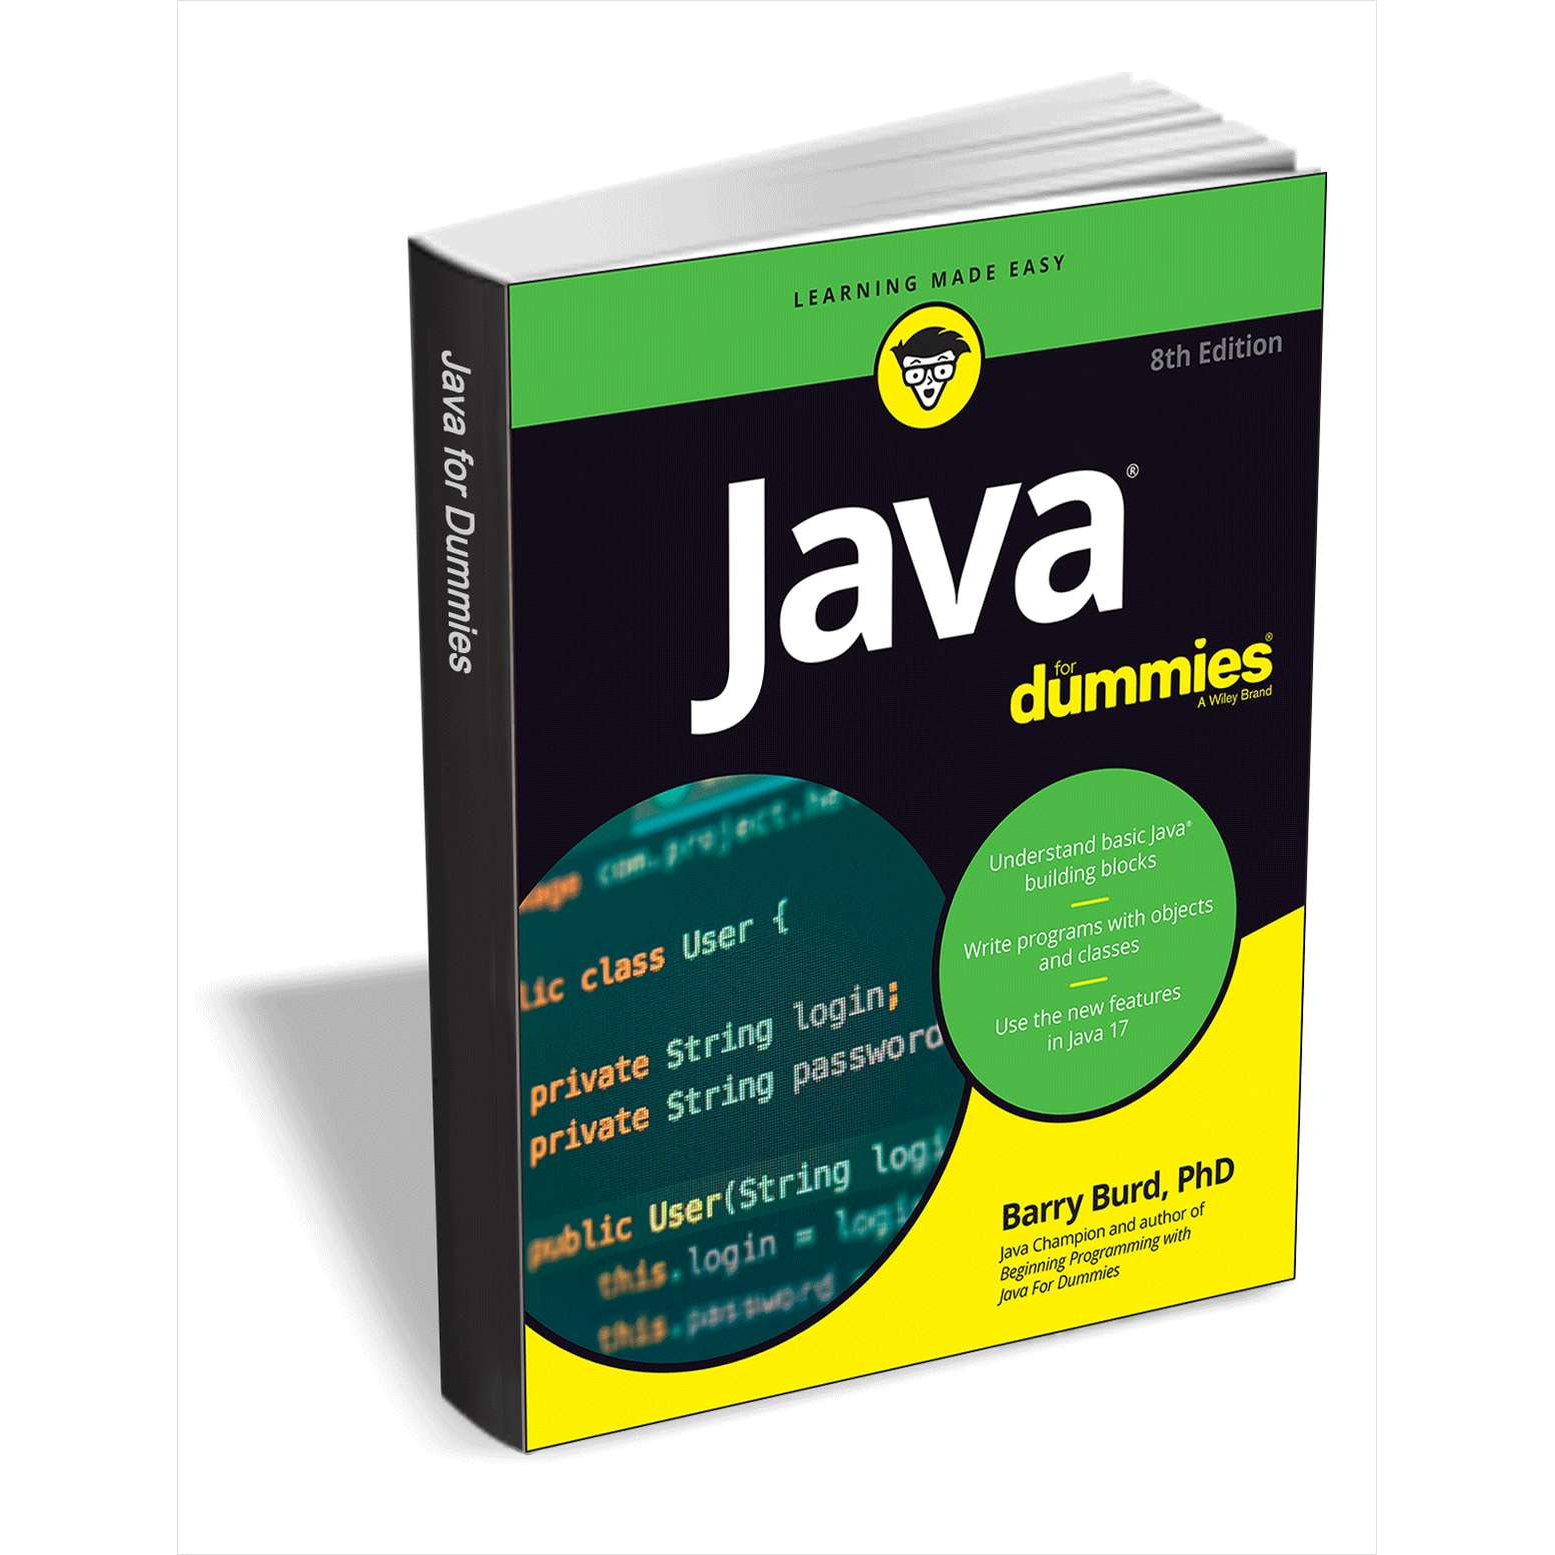 Java For Dummies, 8th Edition ($18.00 Value) FREE for a Limited Time Screenshot